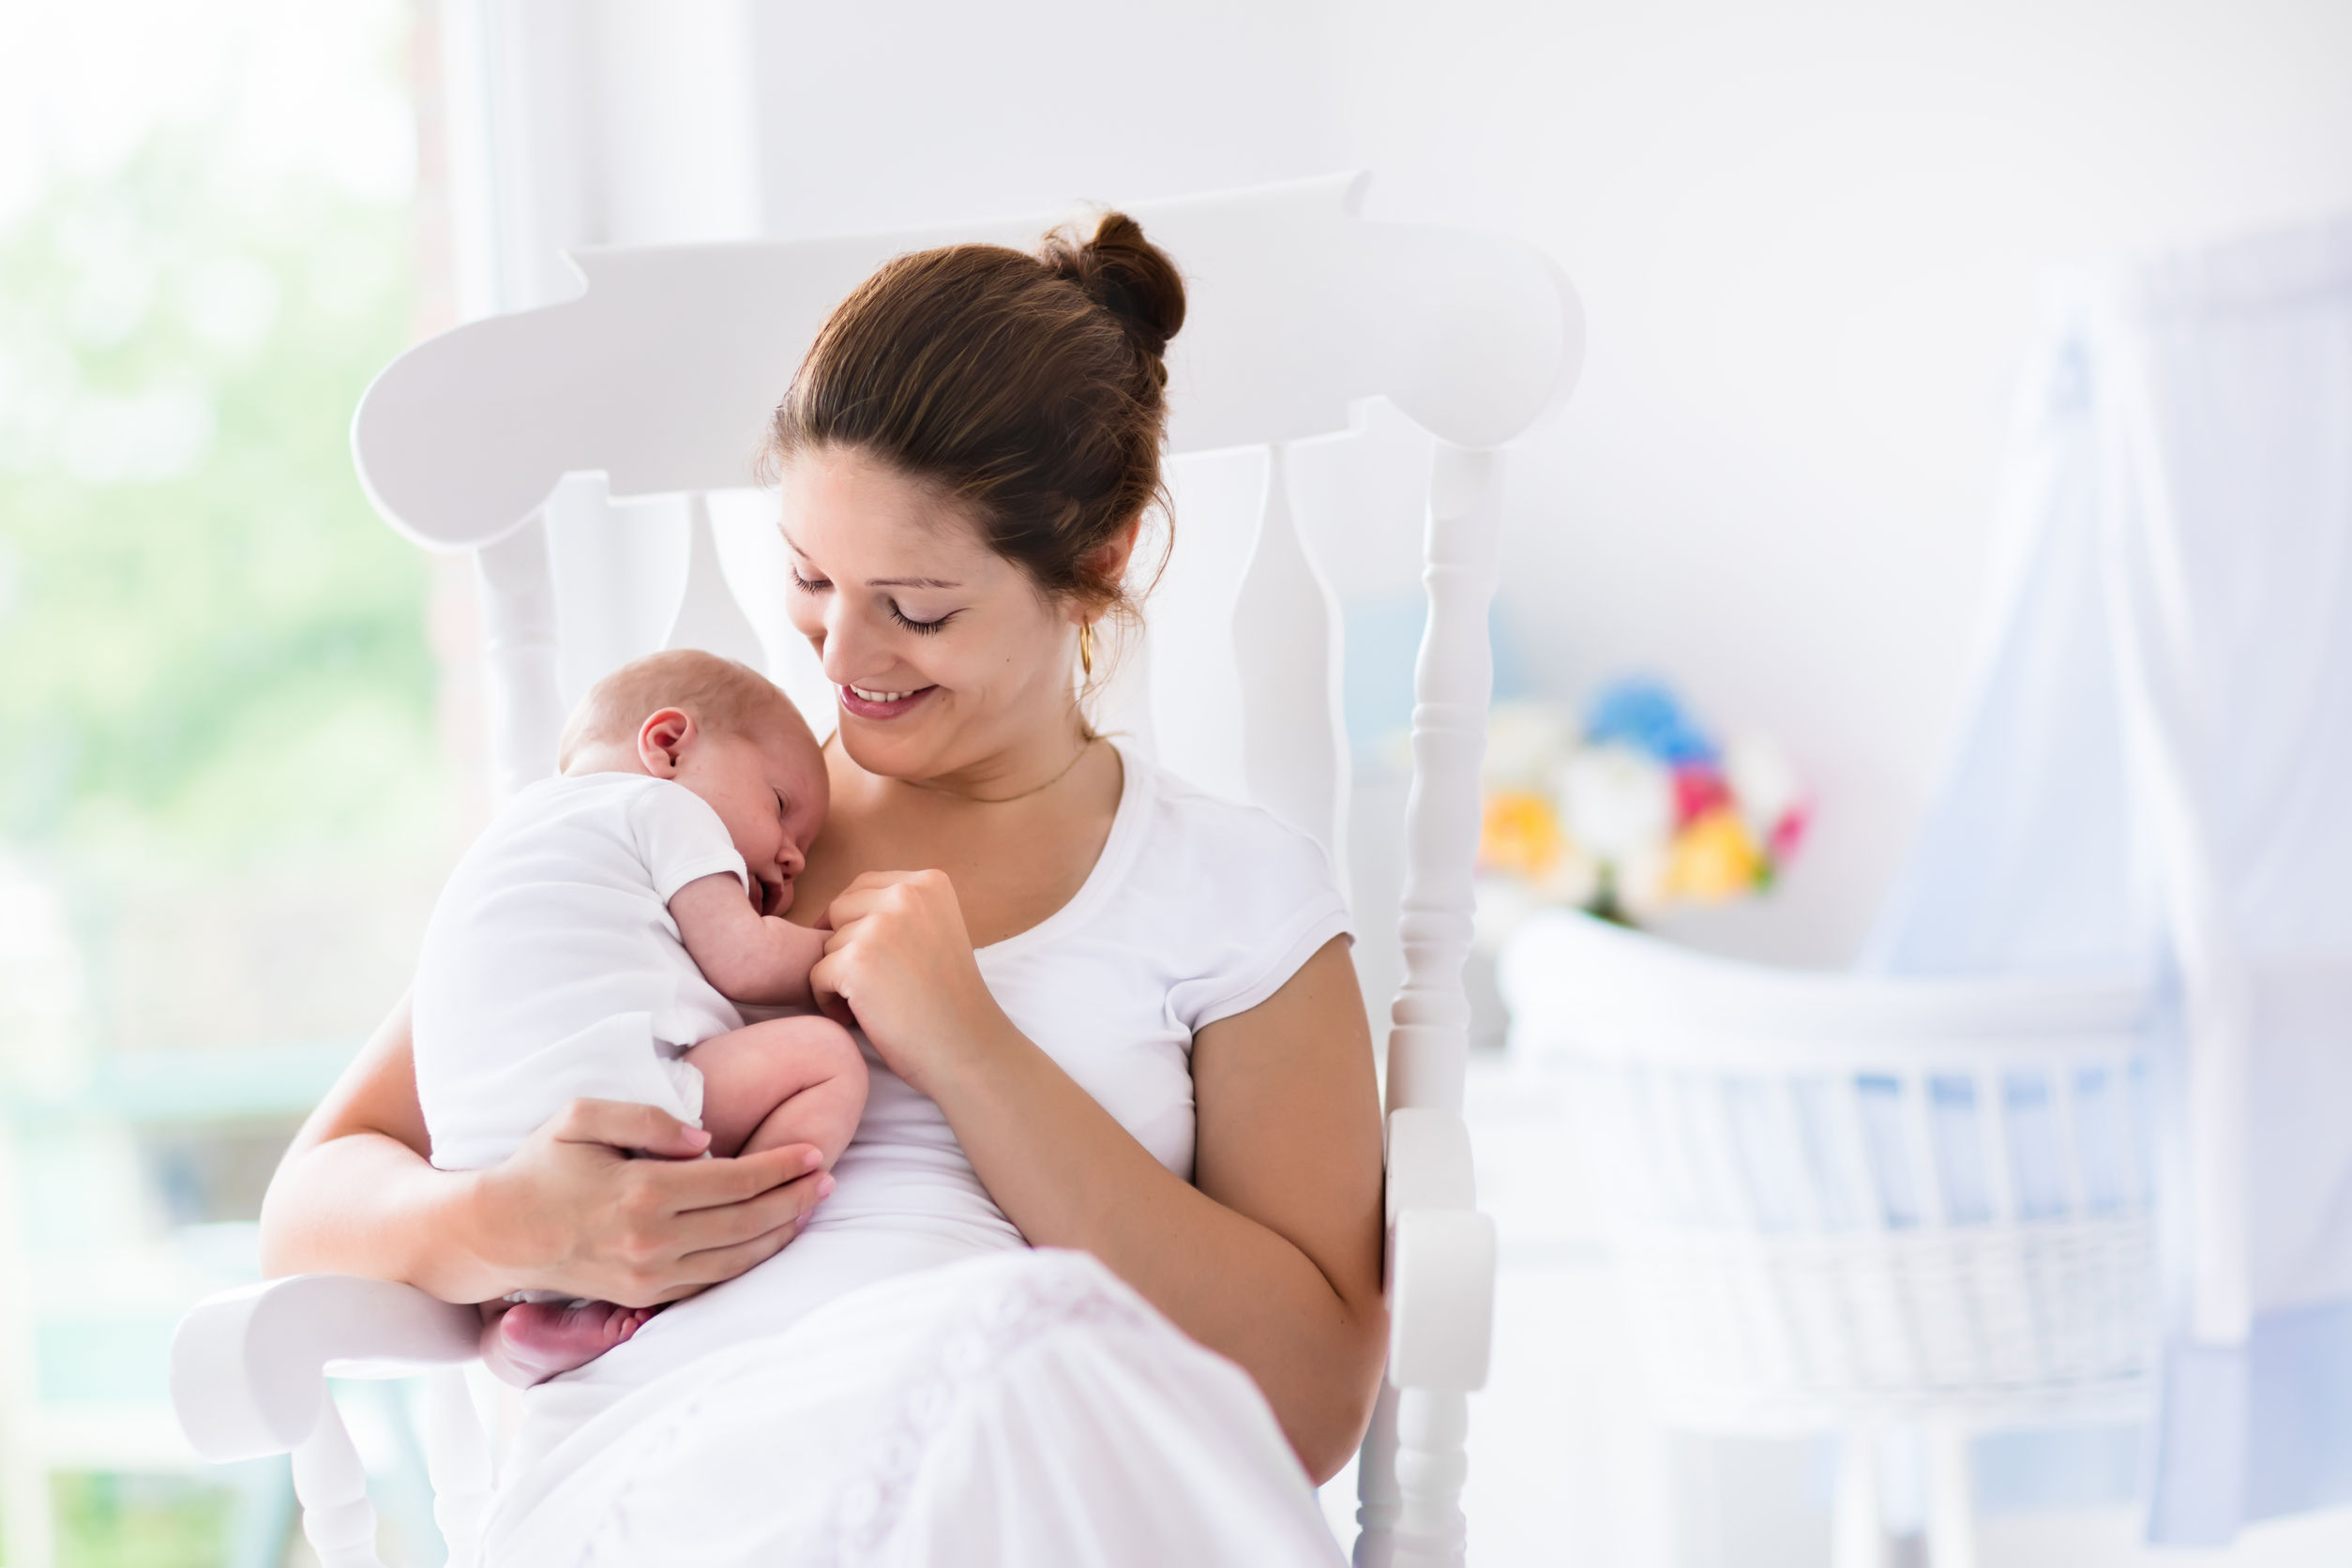 Breastfeeding After The Process Of Breast Surgery